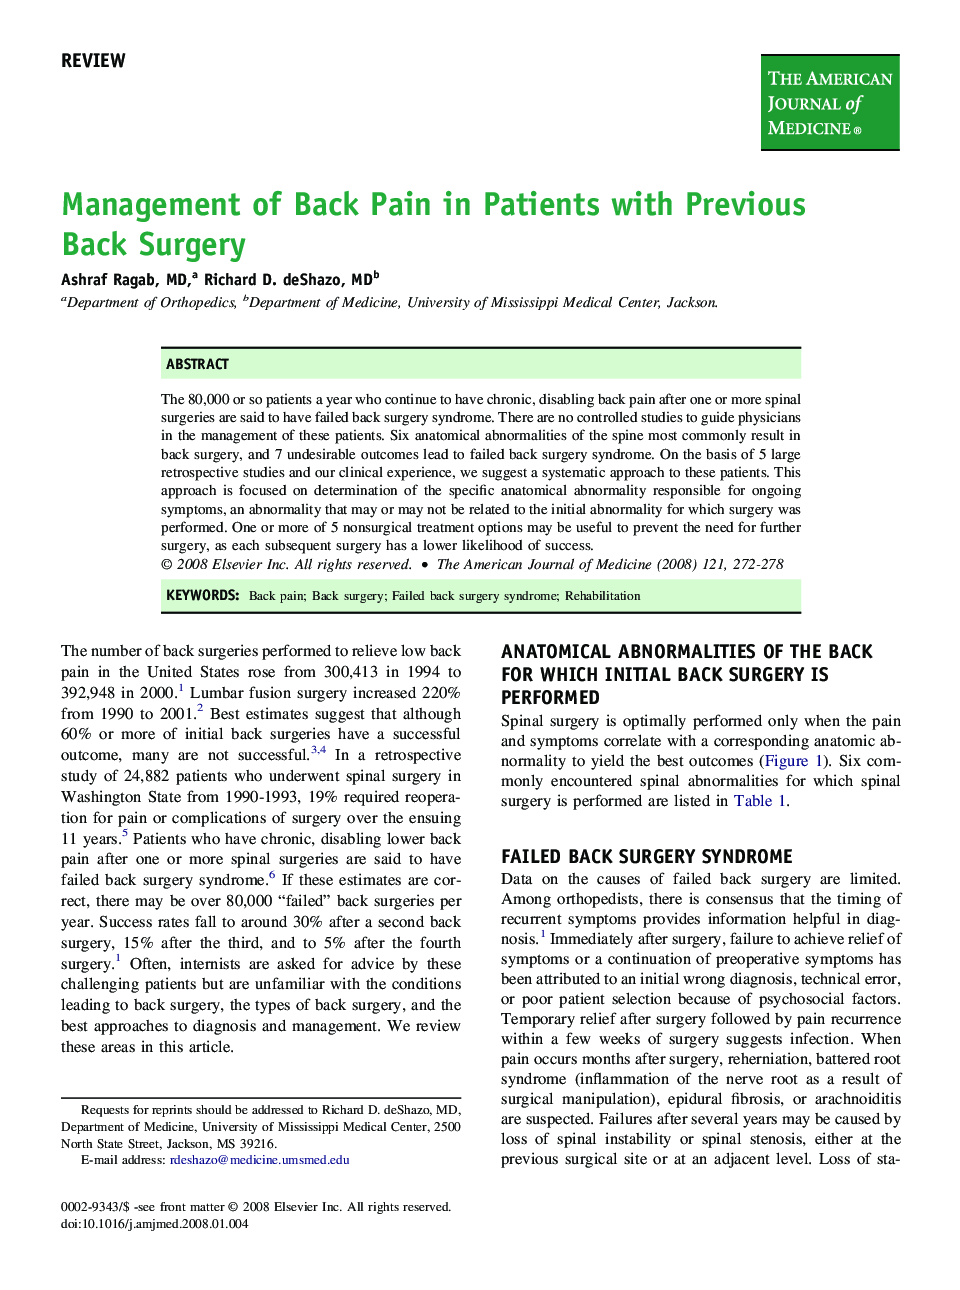 Management of Back Pain in Patients with Previous Back Surgery